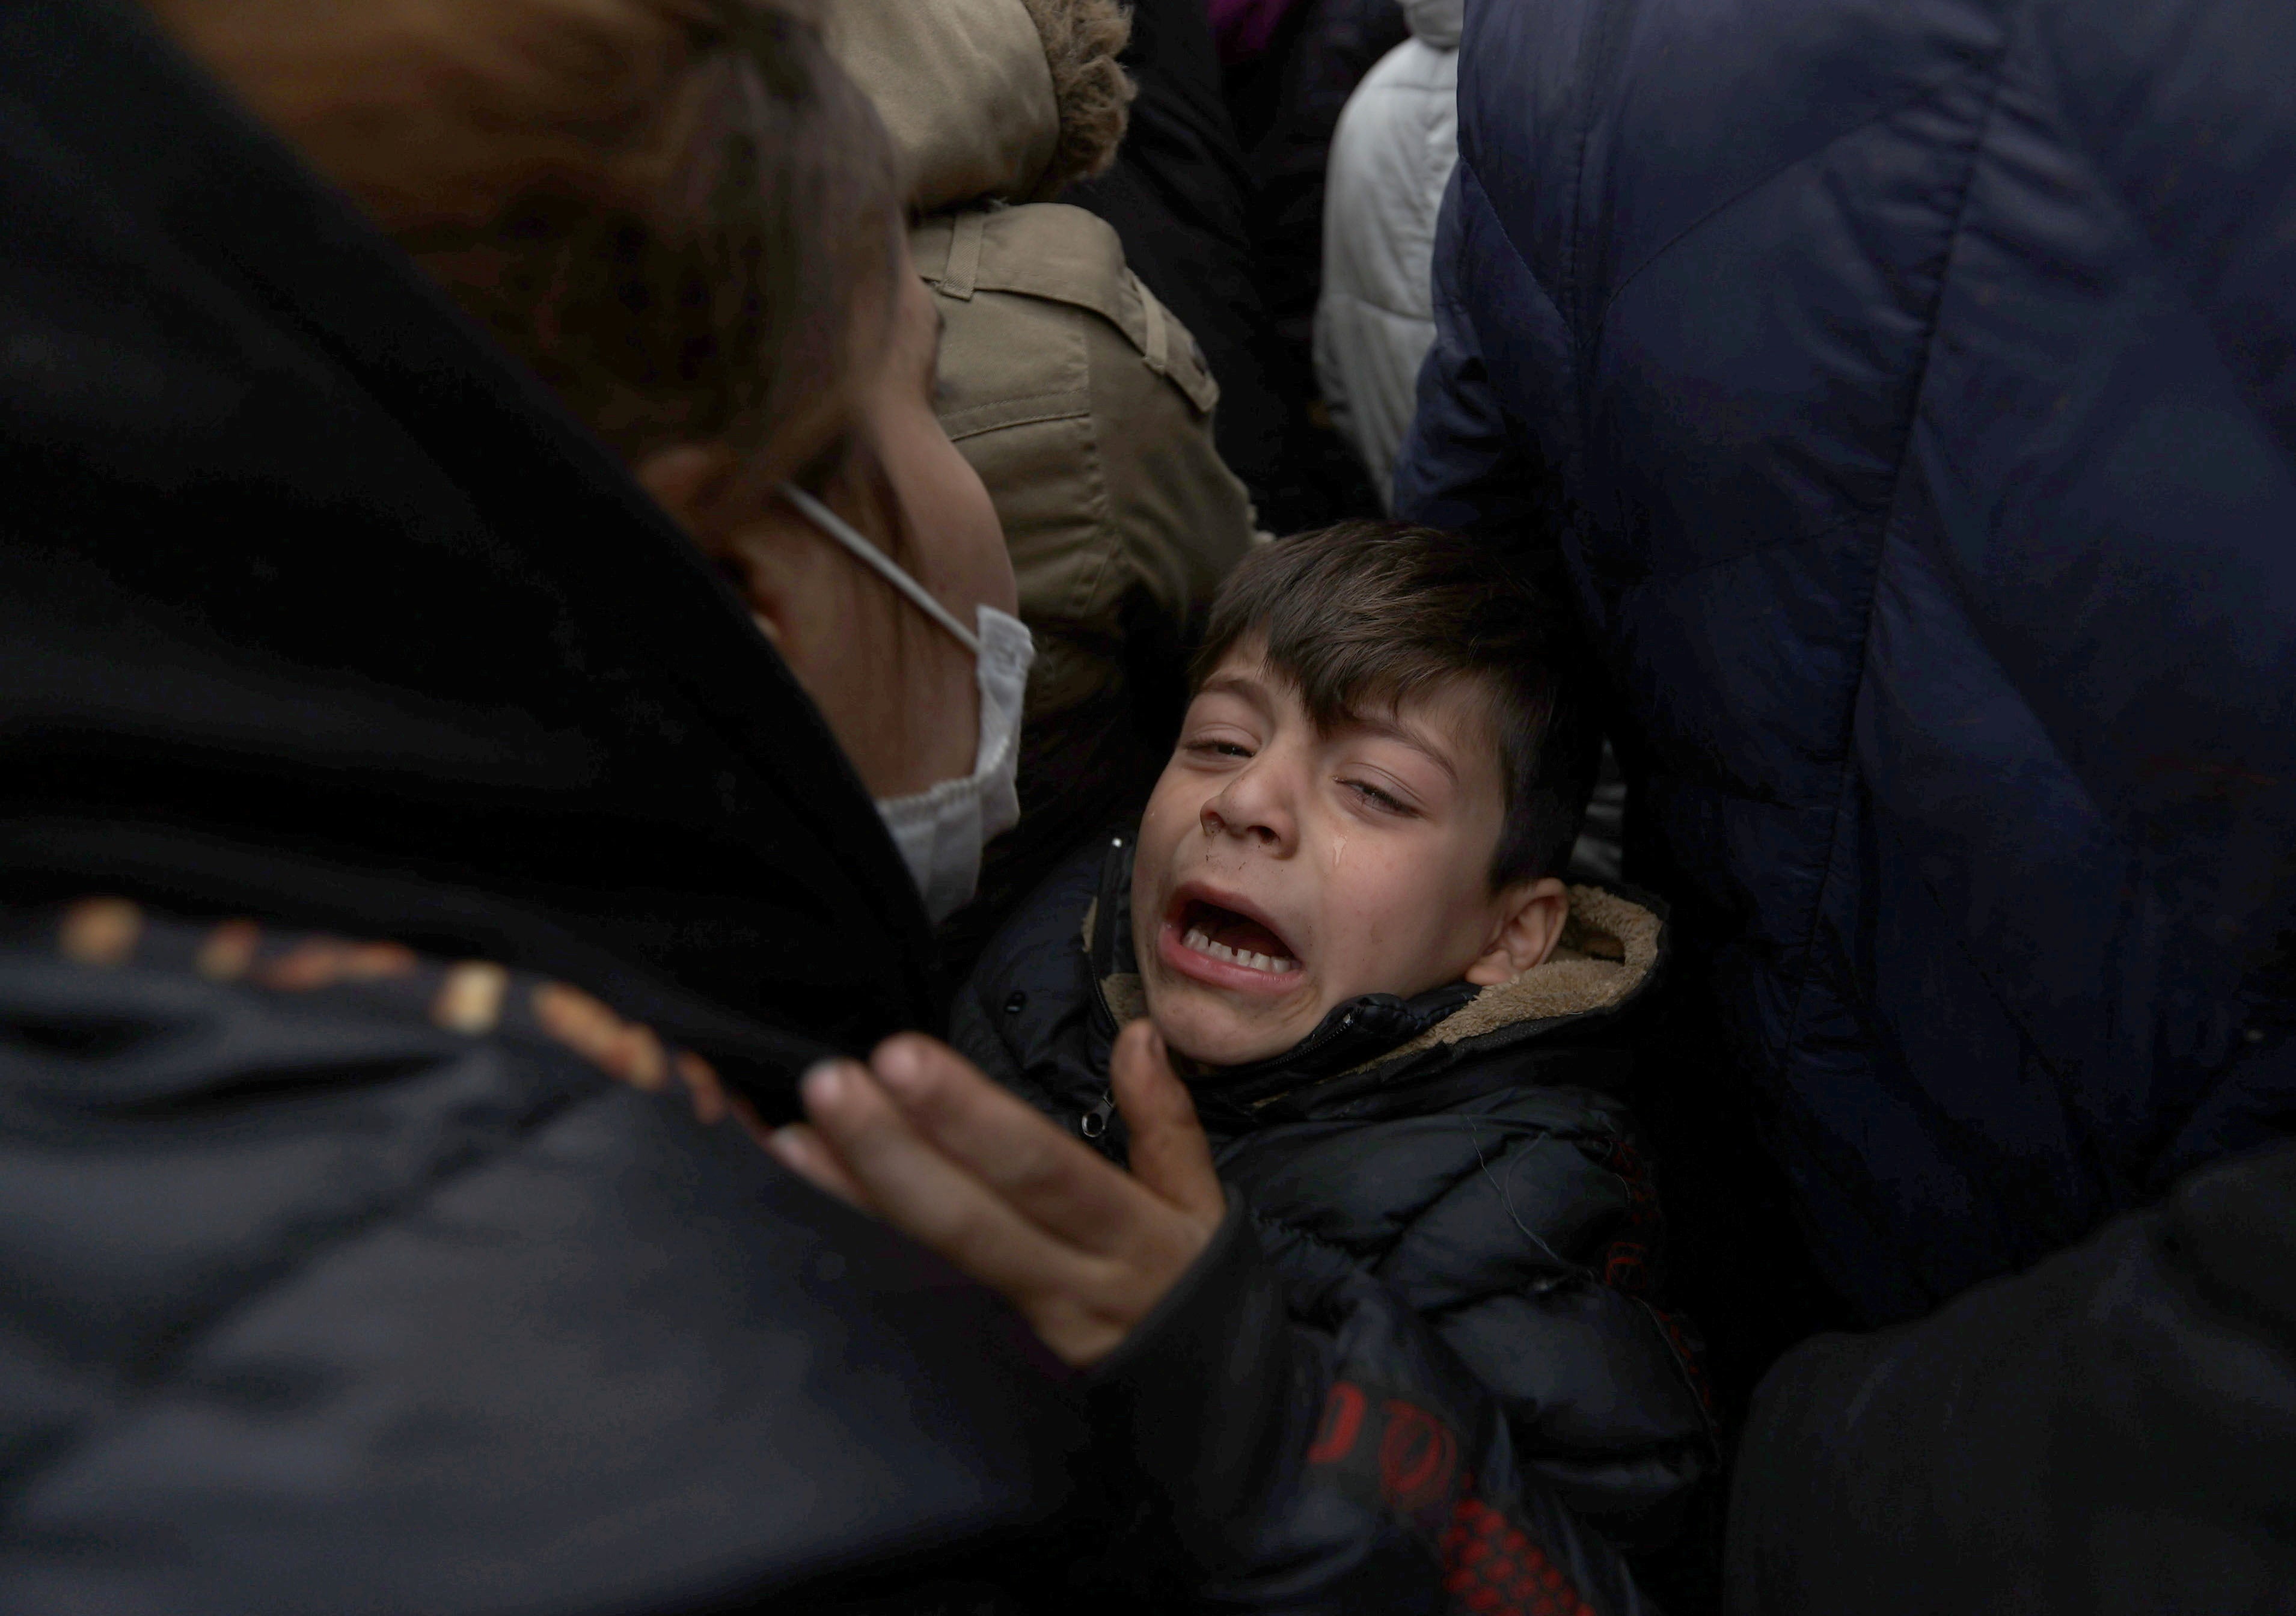 A child is in distress as migrants gather on the Belarusian-Polish border on Thursday